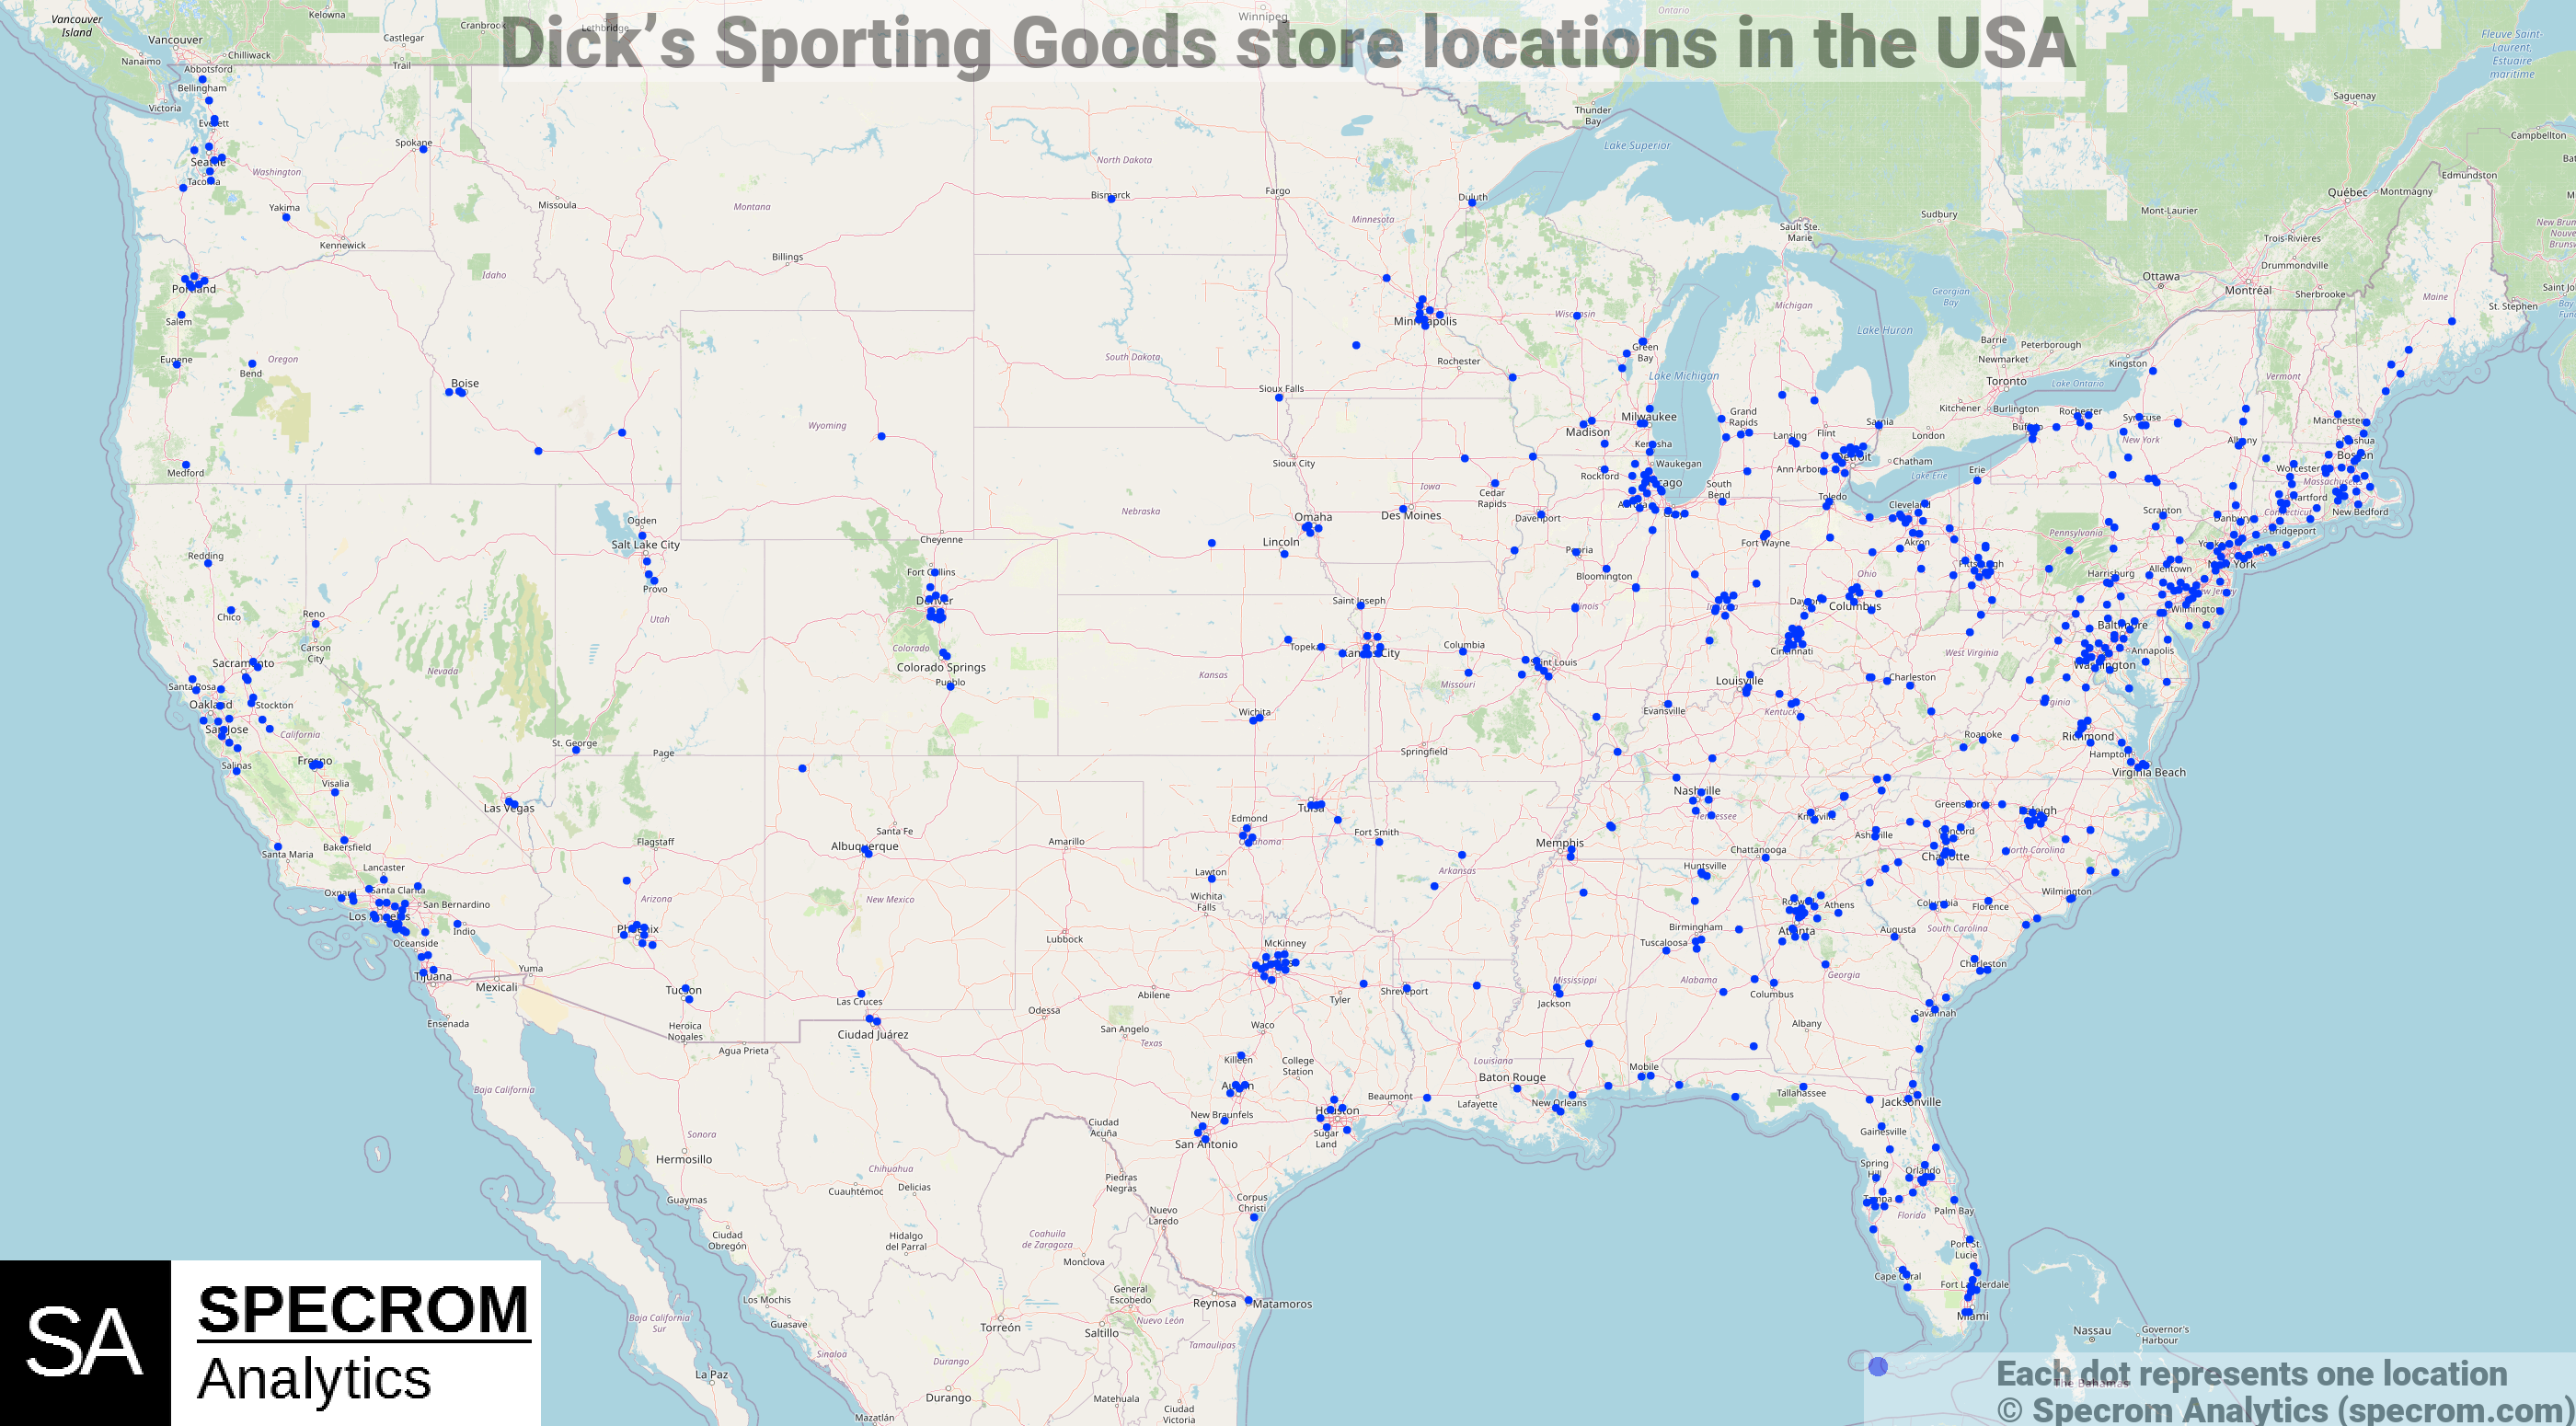 Dick's Sporting Goods store locations in the USA